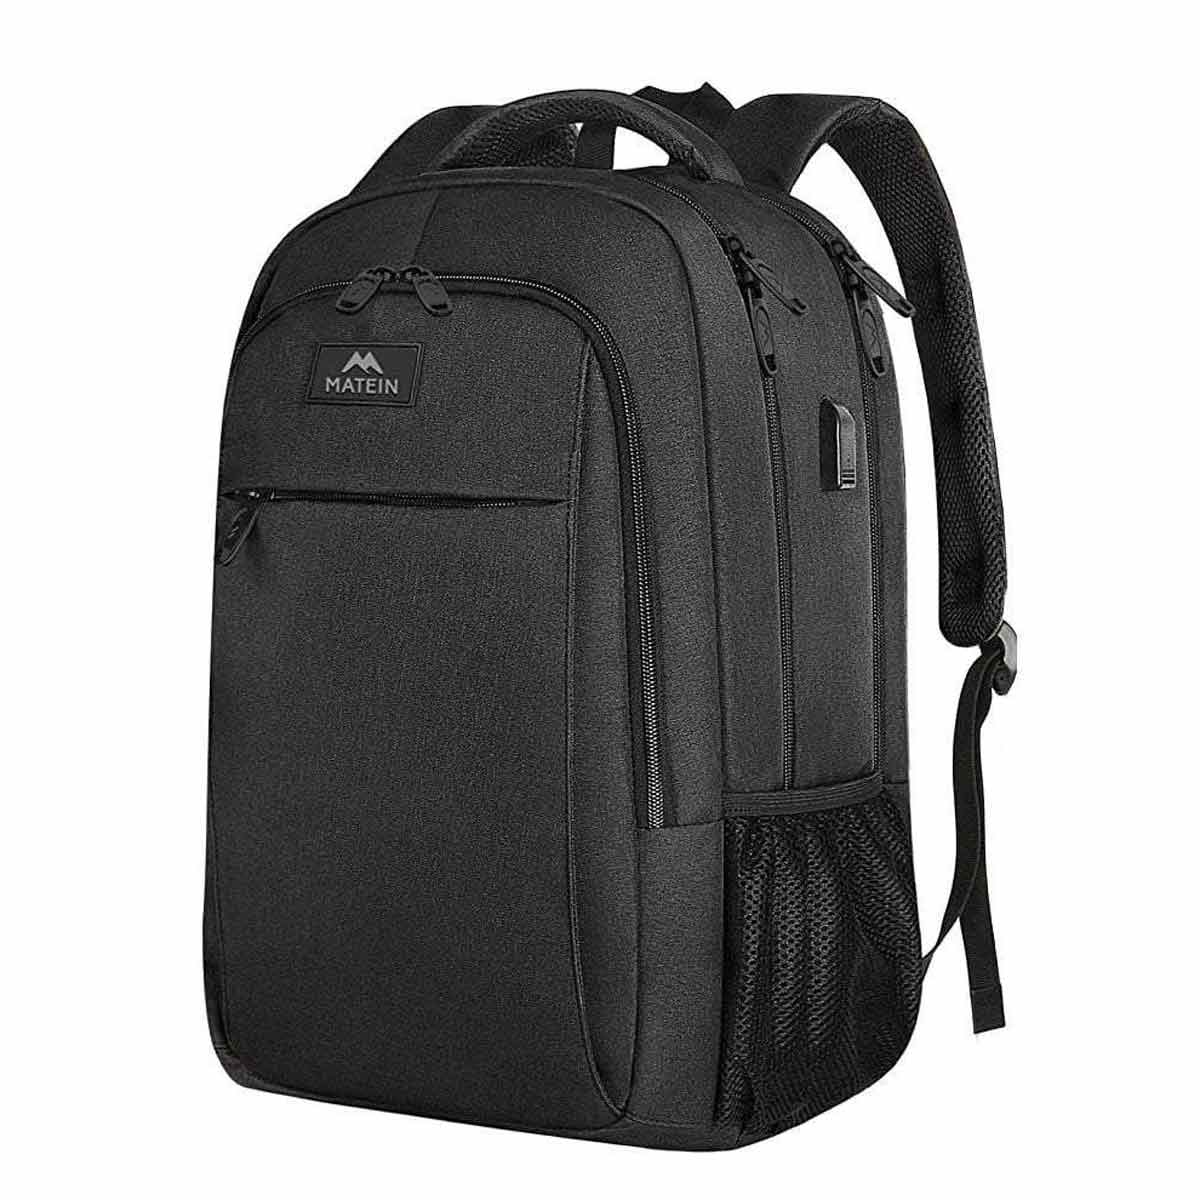 Matein Mlassic Travel Laptop Backpack - travel laptop backpack